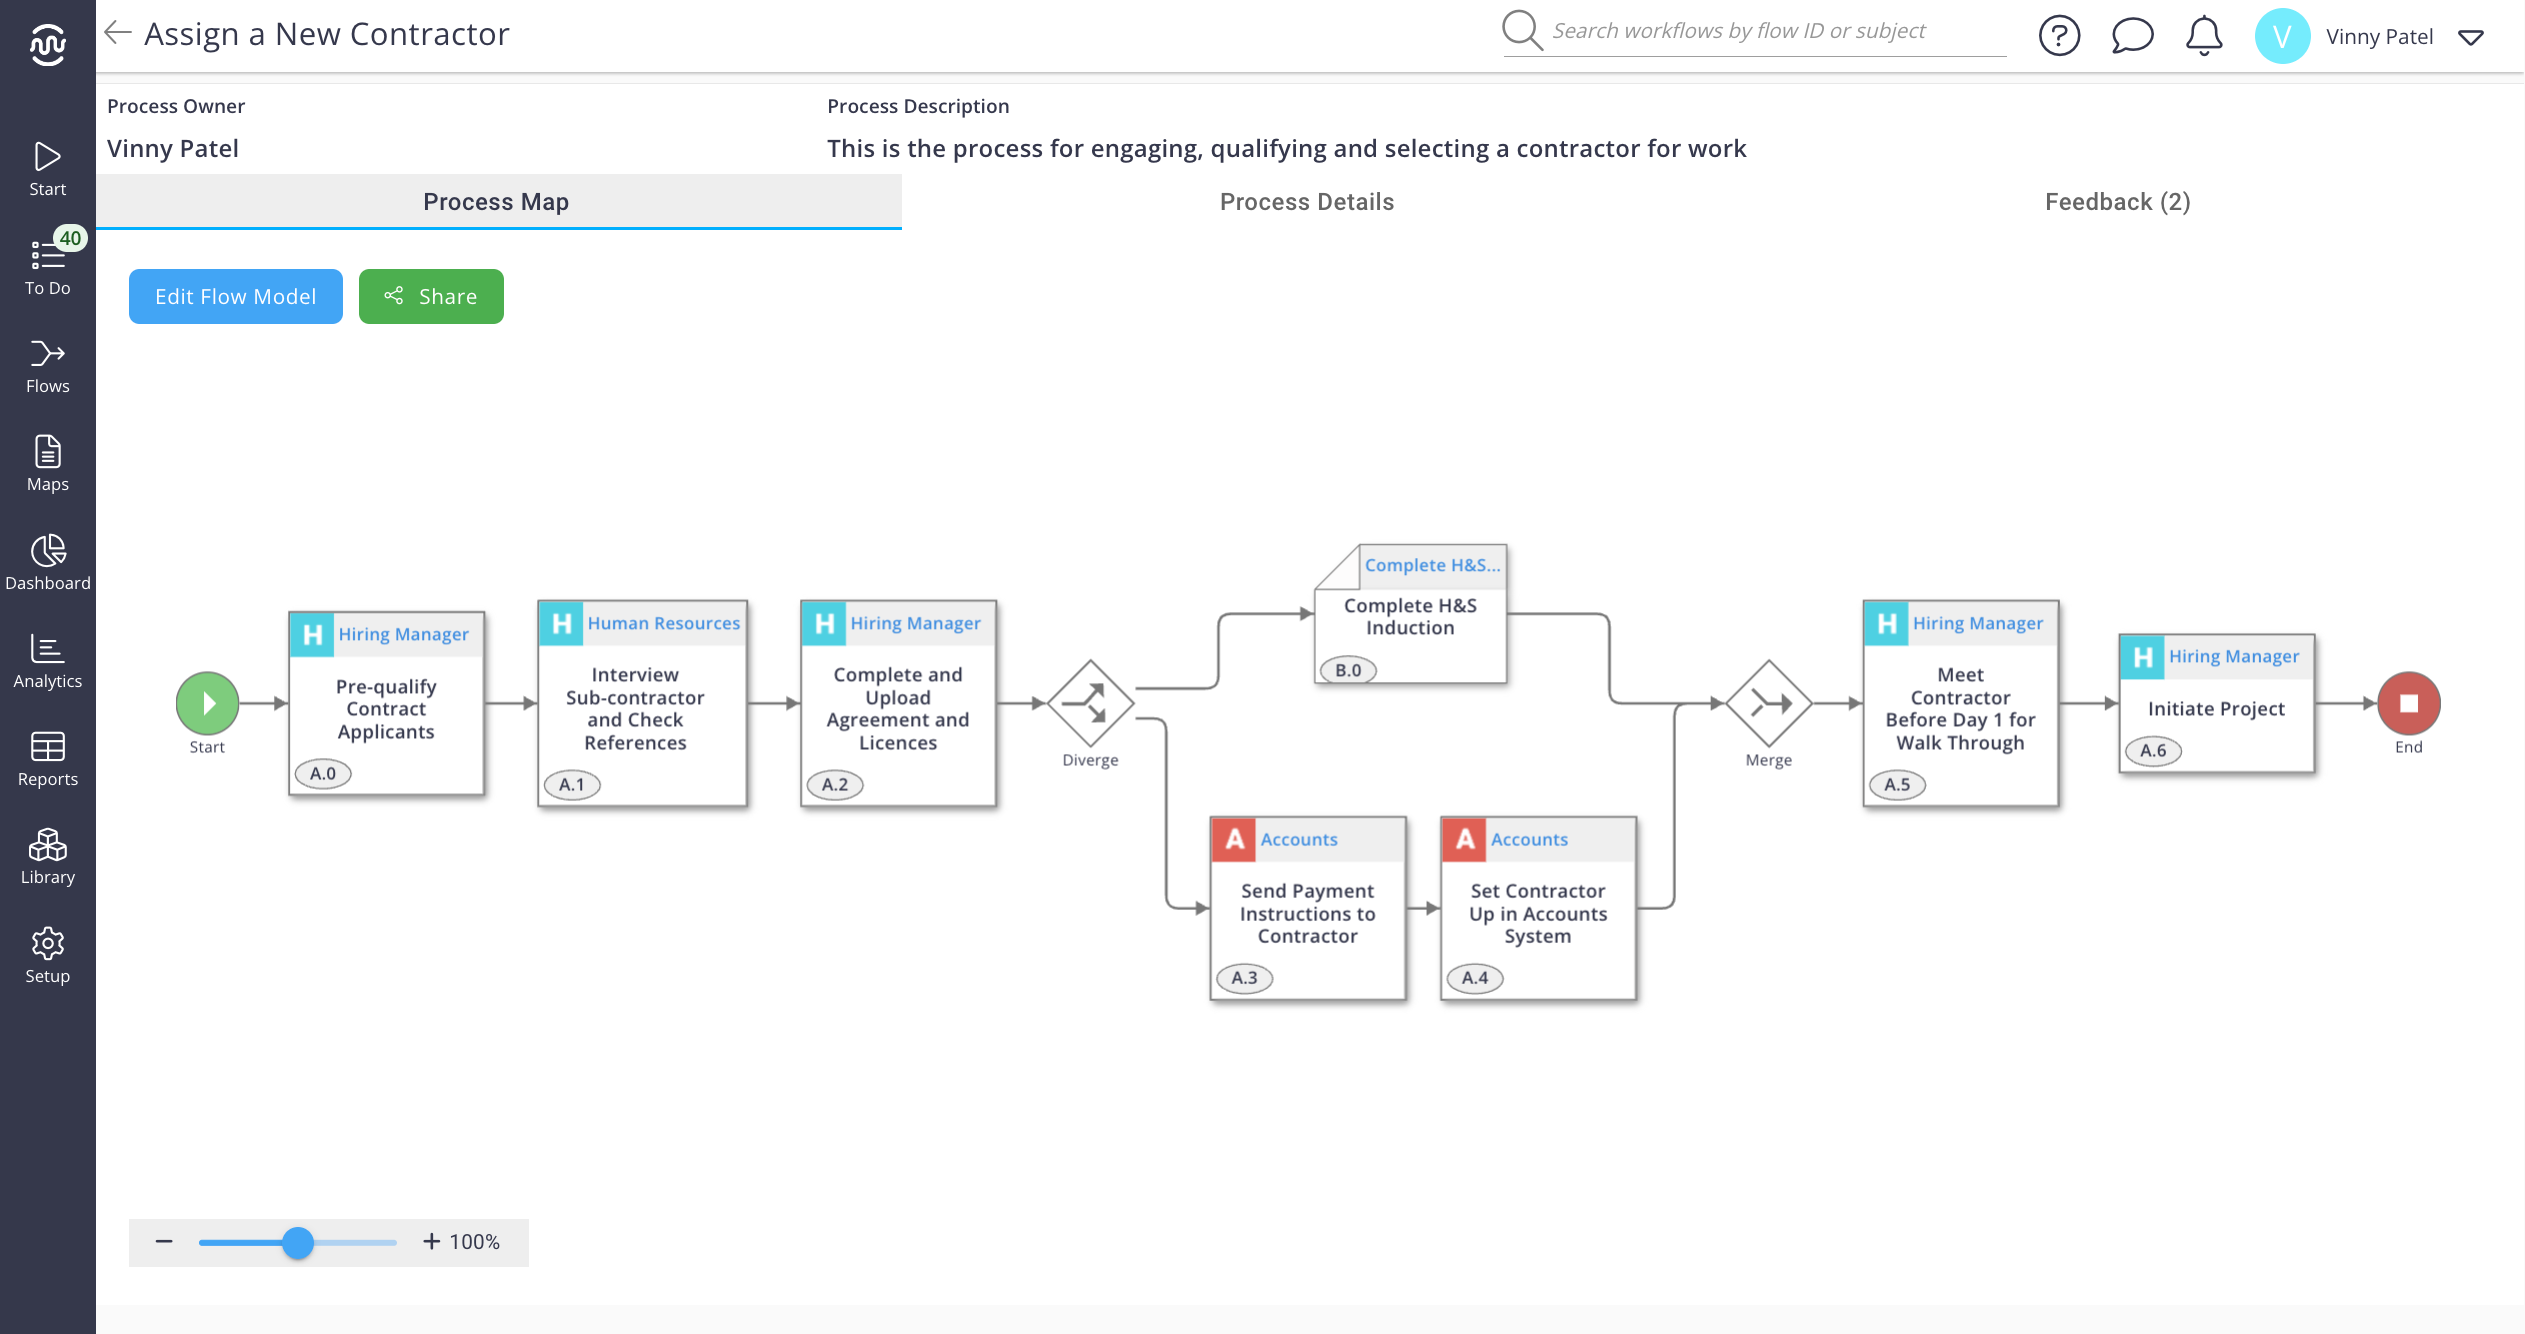 Product Release Update - Process Map Linking